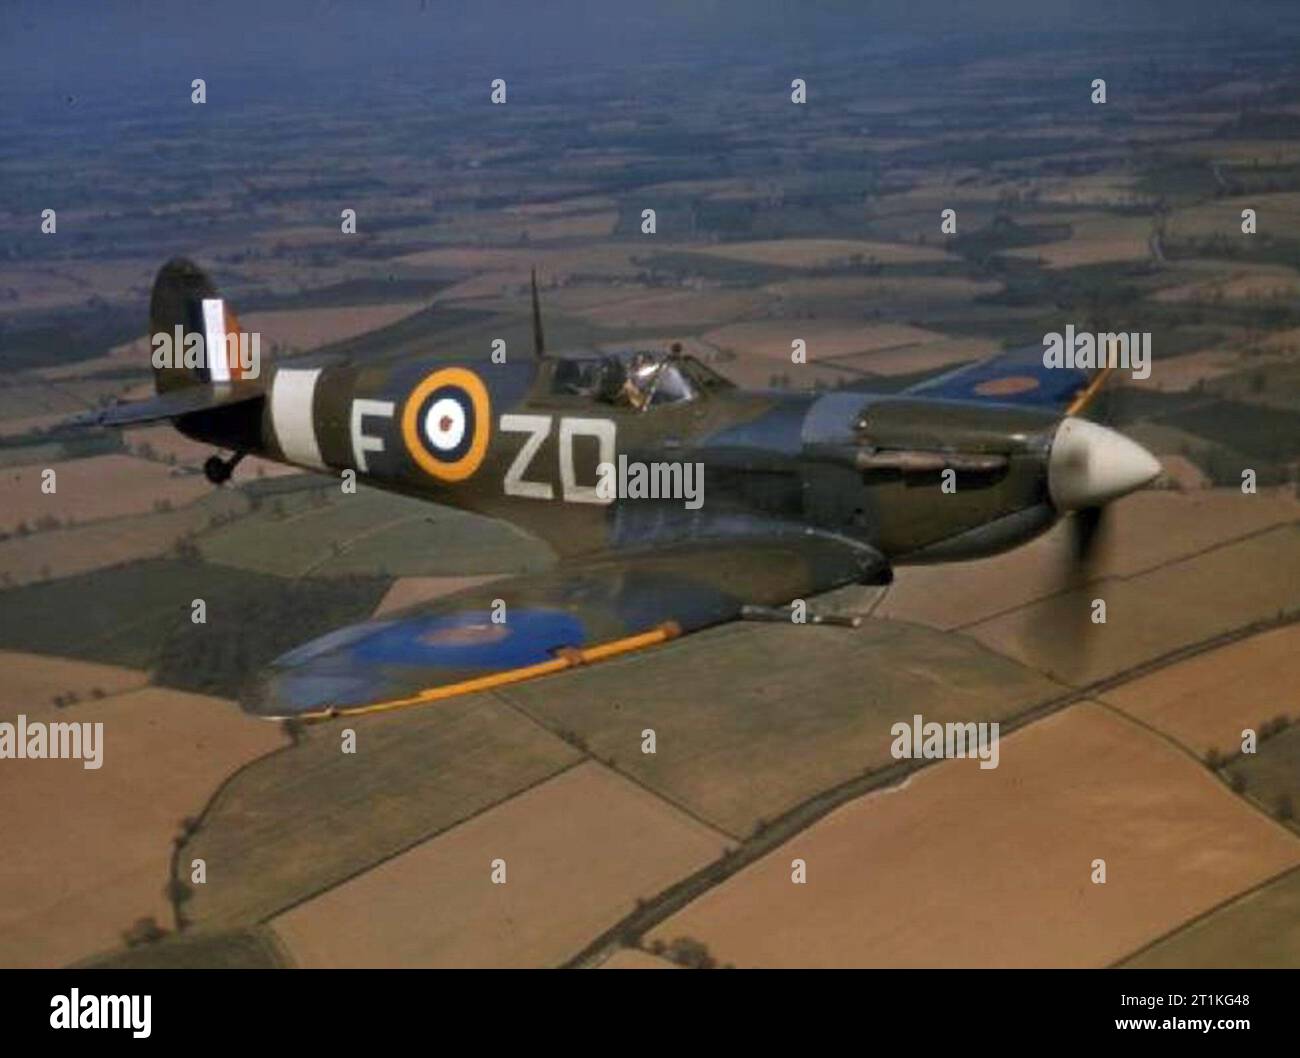 A Royal Air Force Spitfire Mark VB (AD233, 'ZD-F') being flown by the Commanding Officer of No. 222 Squadron RAF, Squadron Leader Richard Milne, when based at North Weald, Essex (RAF). On 25 May 1942, AD233 was shot down by German Focke Wulf Fw 190s over Gravelines (France), while being flown by Squadron Leader Jankiewicz. This particular Spitfire was part of the Spitfire Fund raising from the Dutch East Indies. On the left side it carried the presentation name 'West Borneo I' Stock Photo